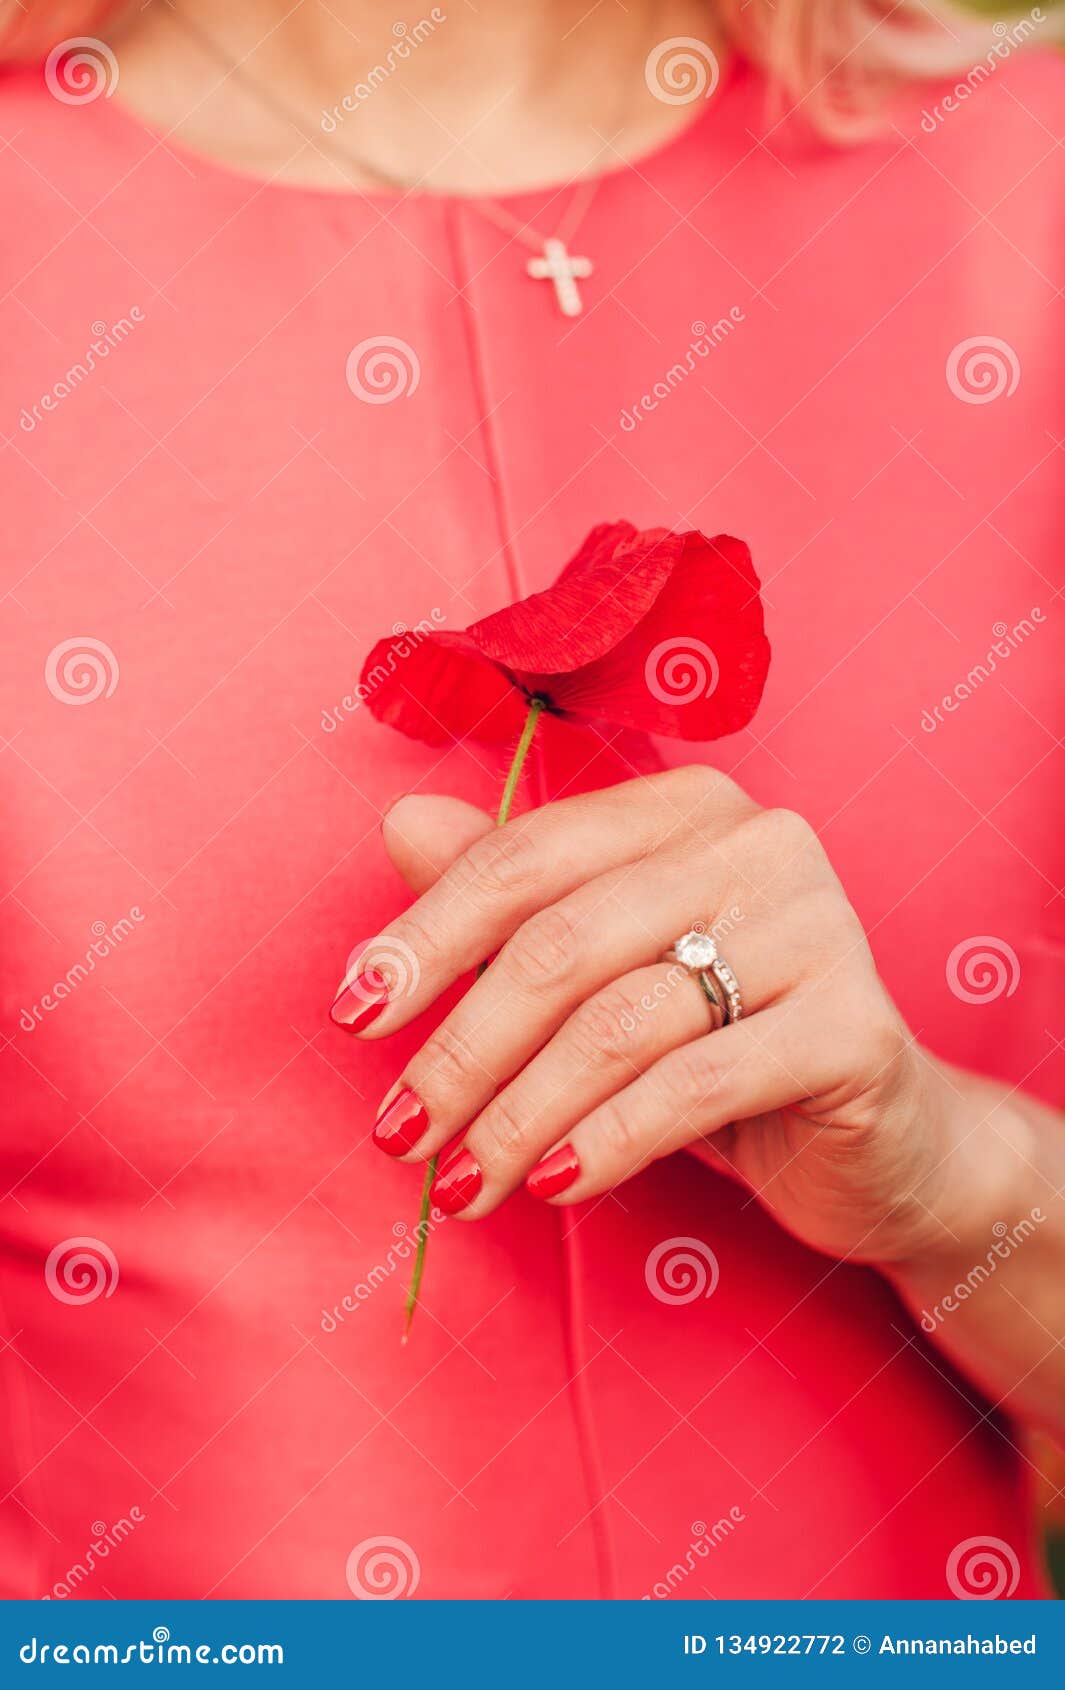 Close Up Image Of Beautiful Woman`s Hand With Perfect Red Manicure